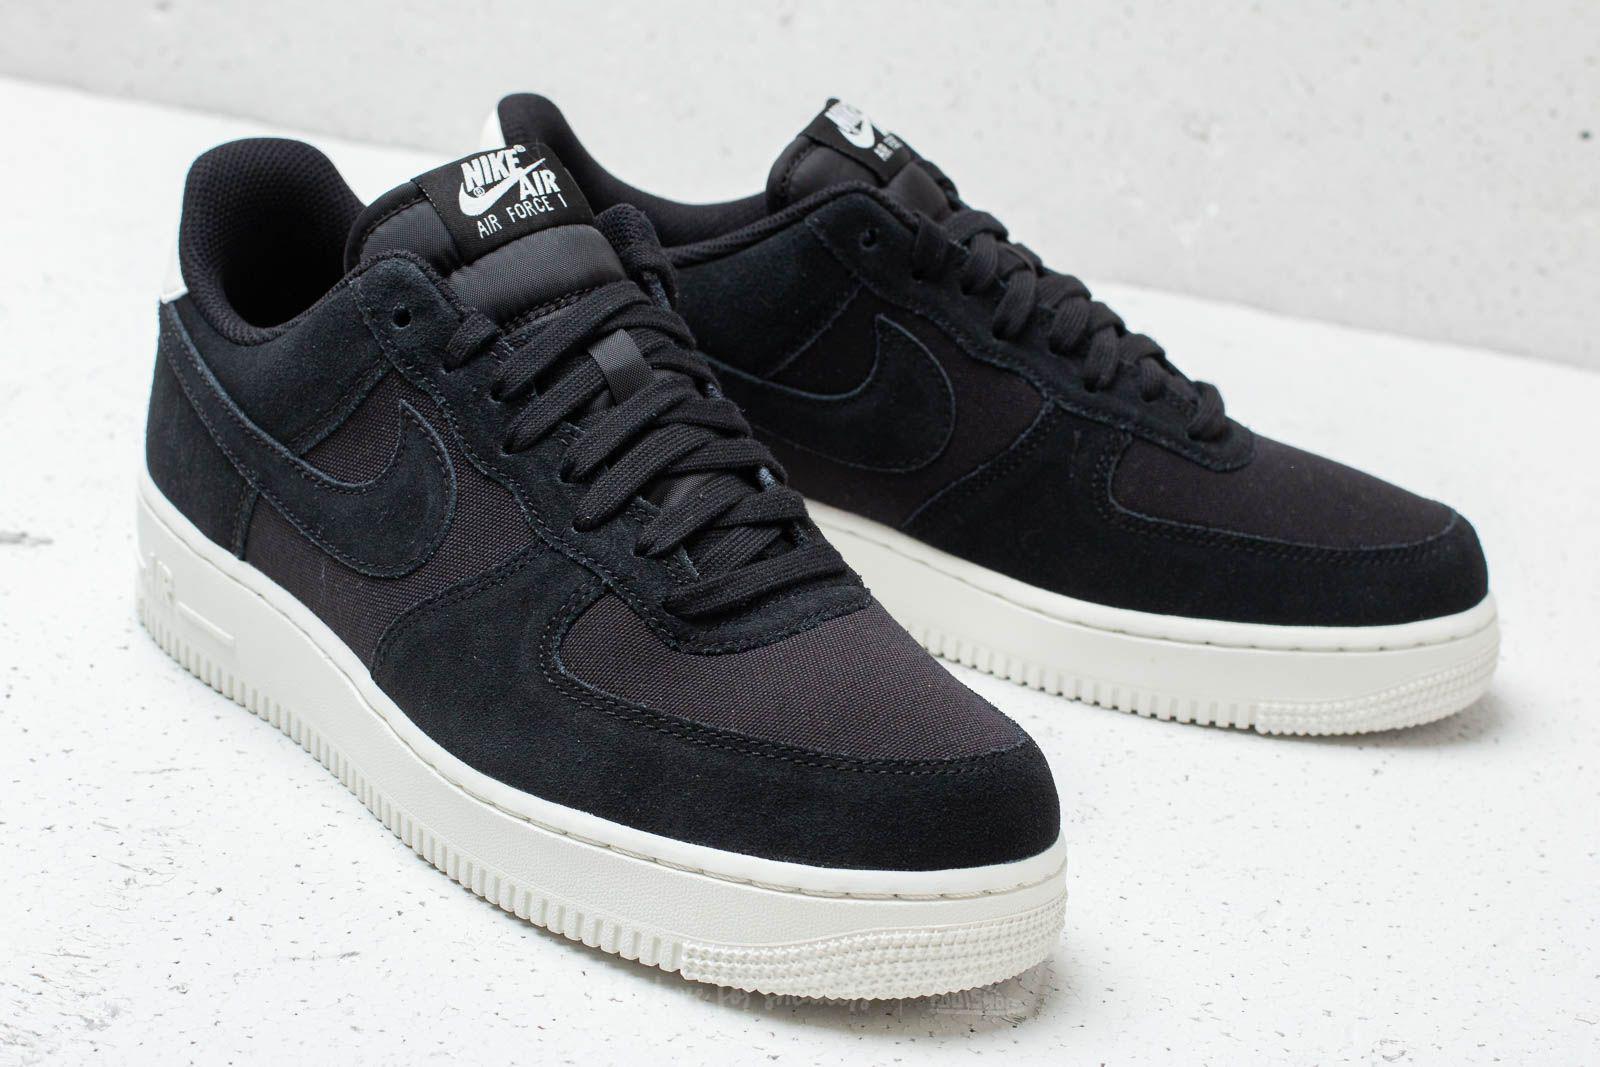 air force 1 suede black and white